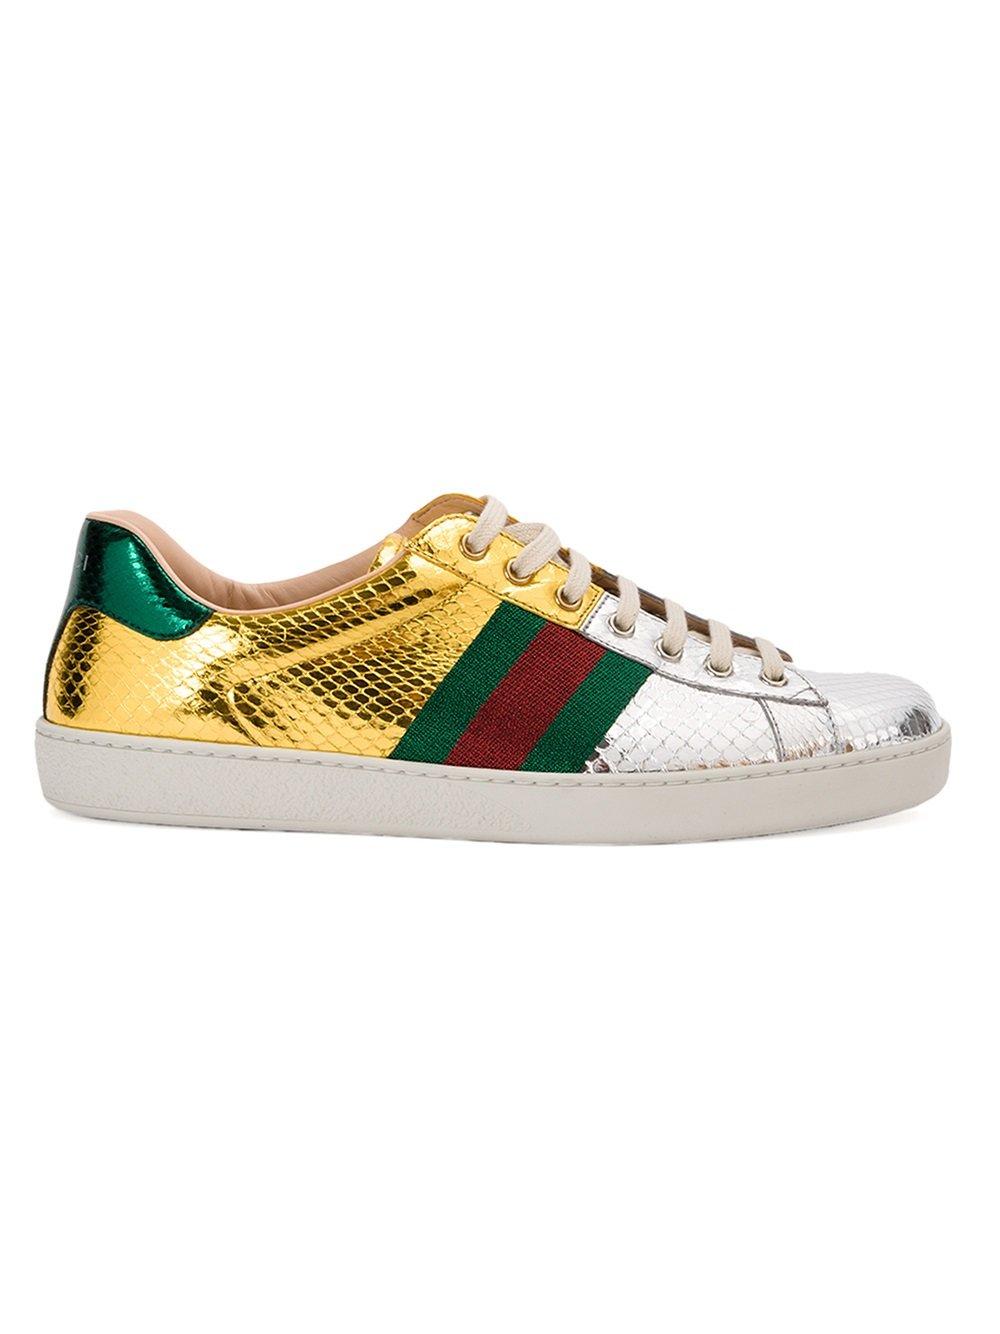 Gucci Leather New Ace Snakeskin Low-top Sneaker in Metallic for Men